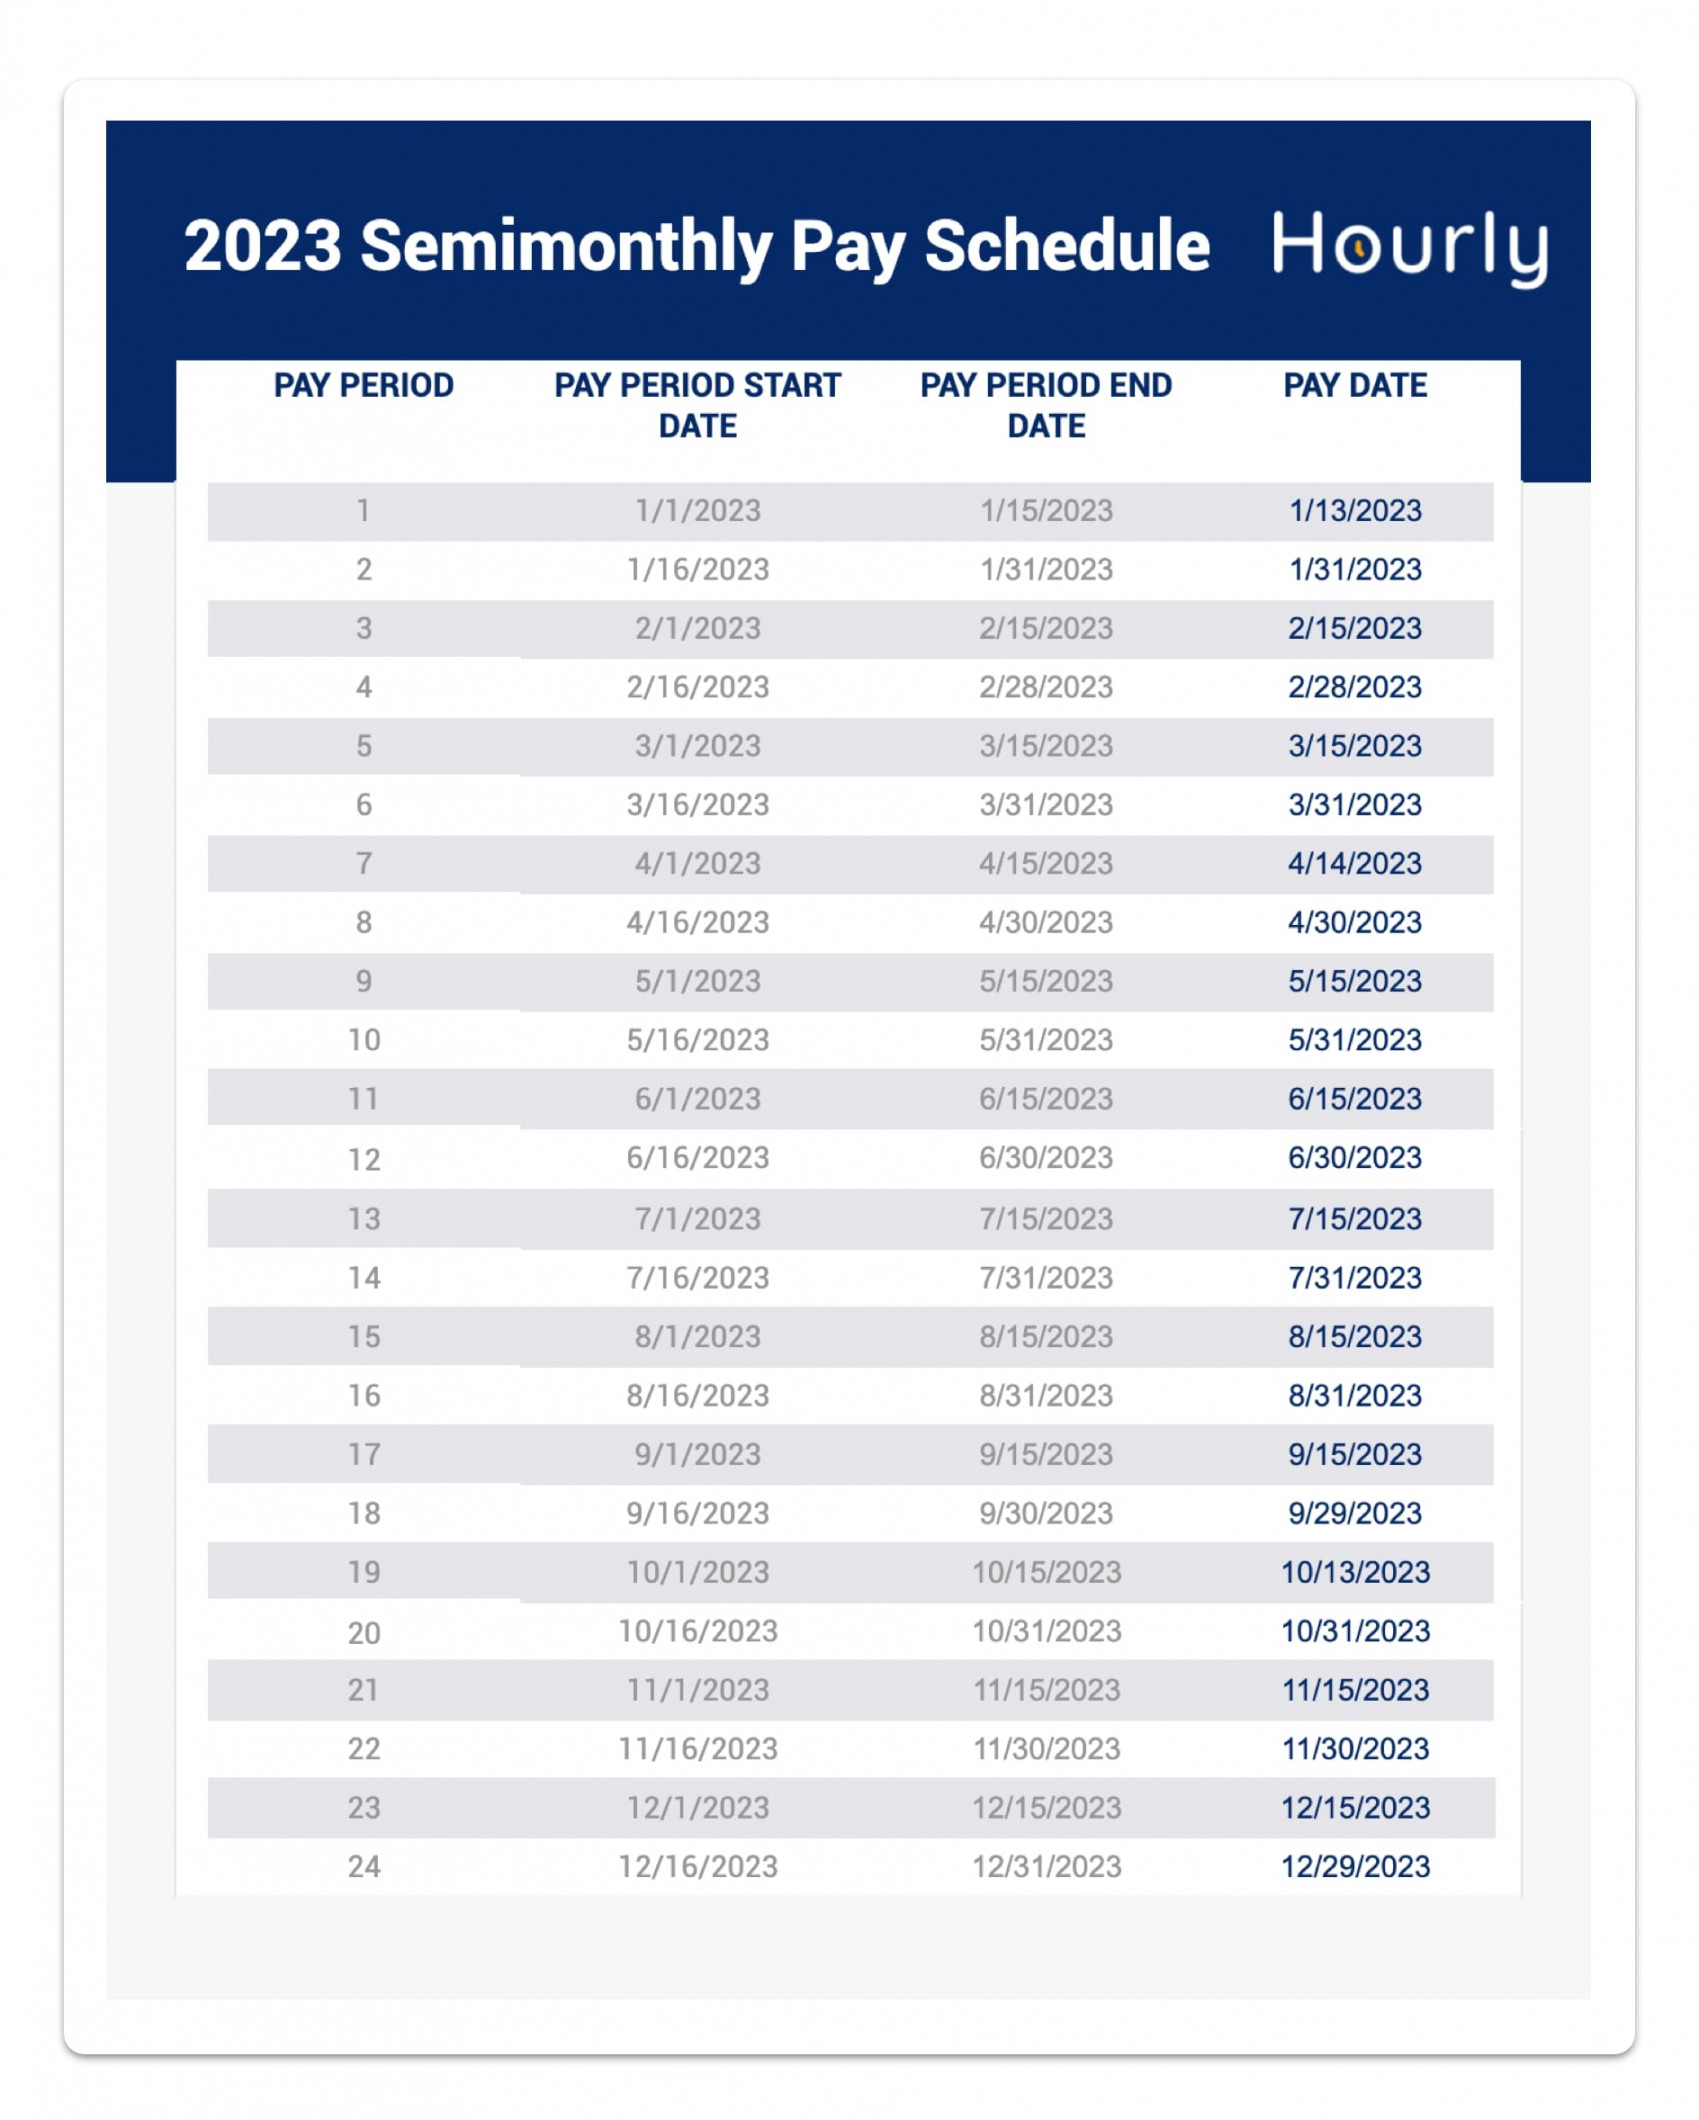 and  Semimonthly Pay Schedules - Hourly, Inc.